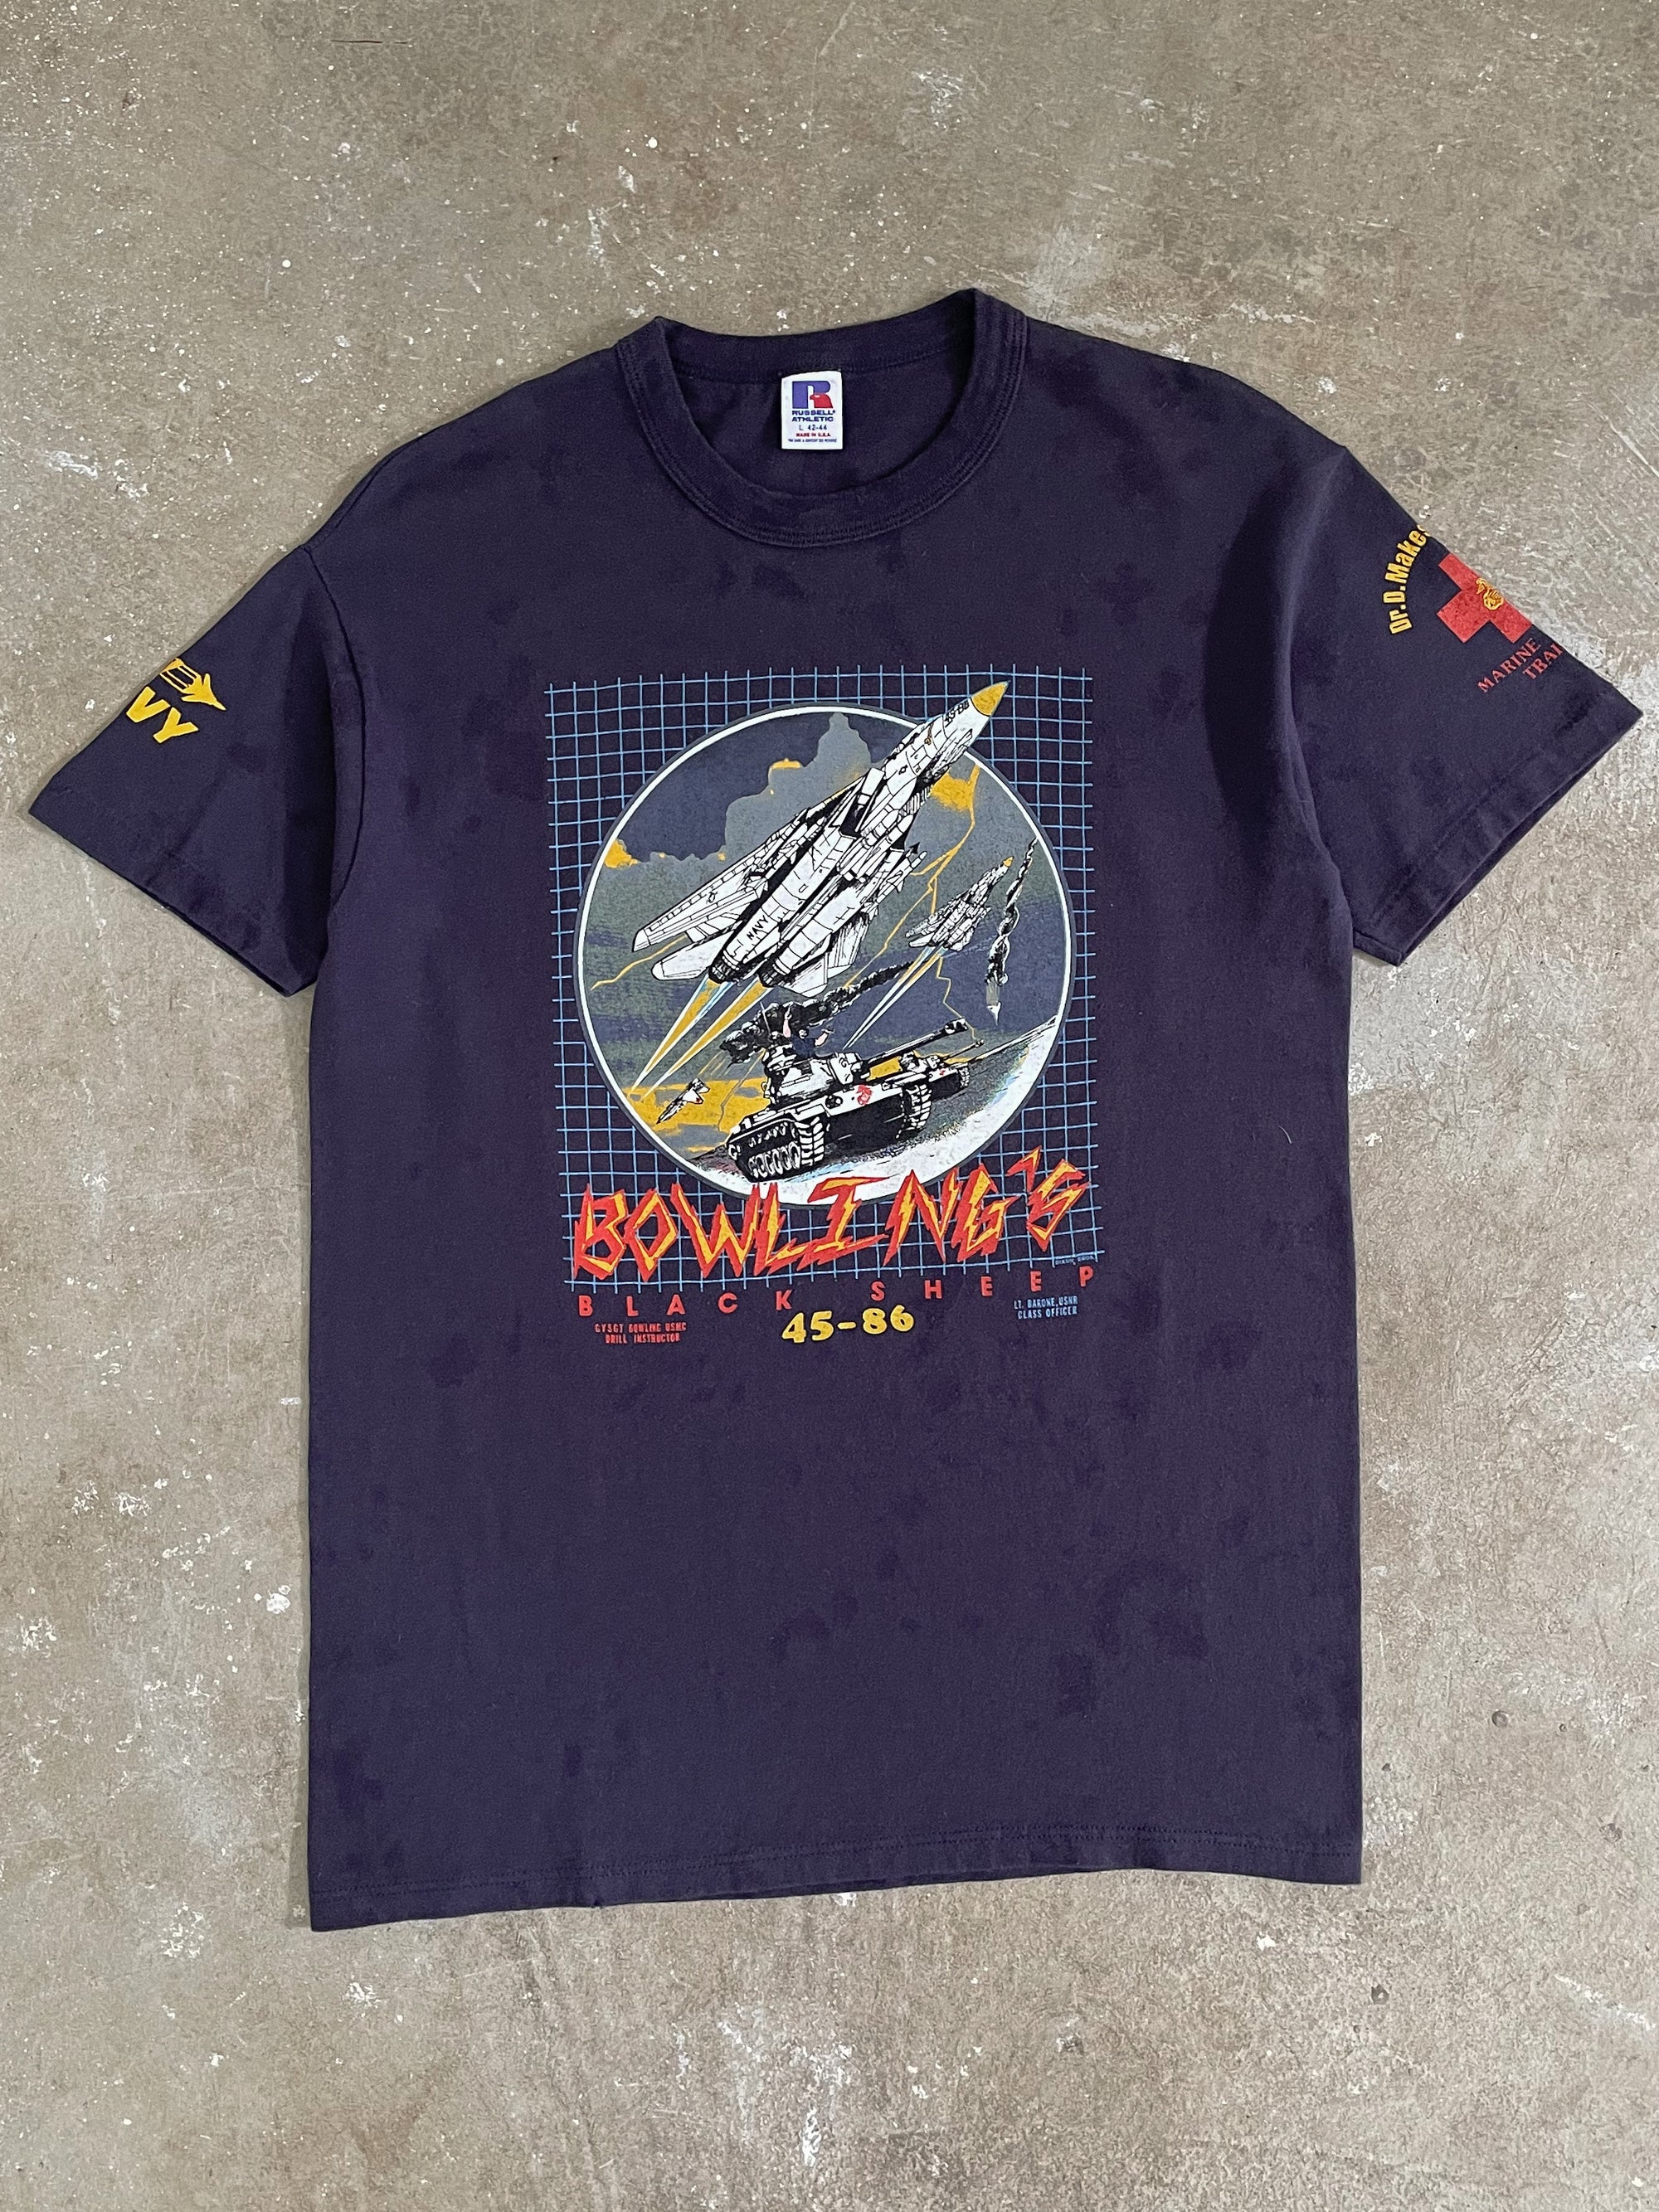 1980s Russell “Black Sheep” Tee (M)